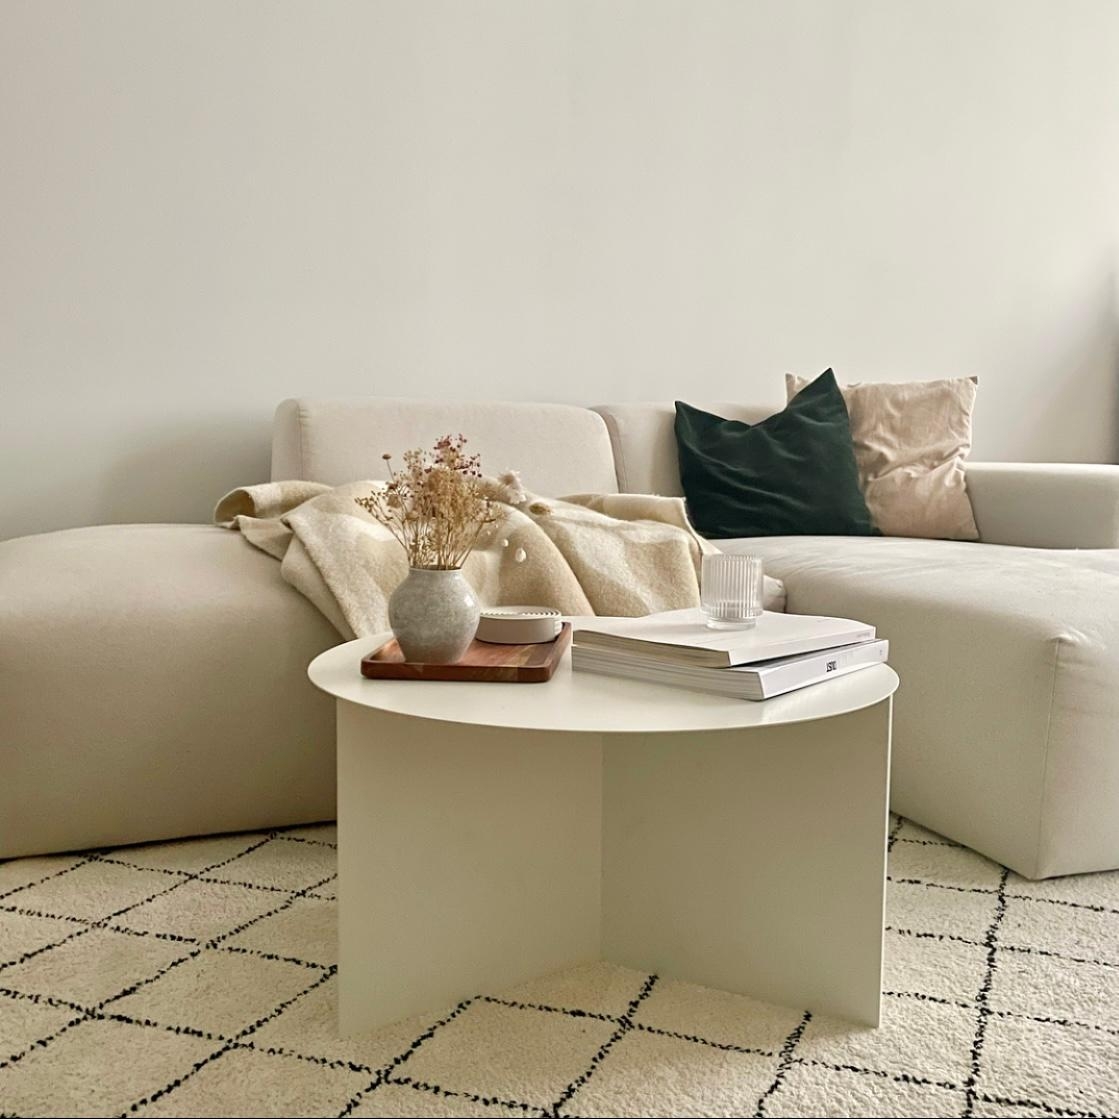 beige is the new black 
#couching #couch #mycs #haydesign #altbauliebe #details